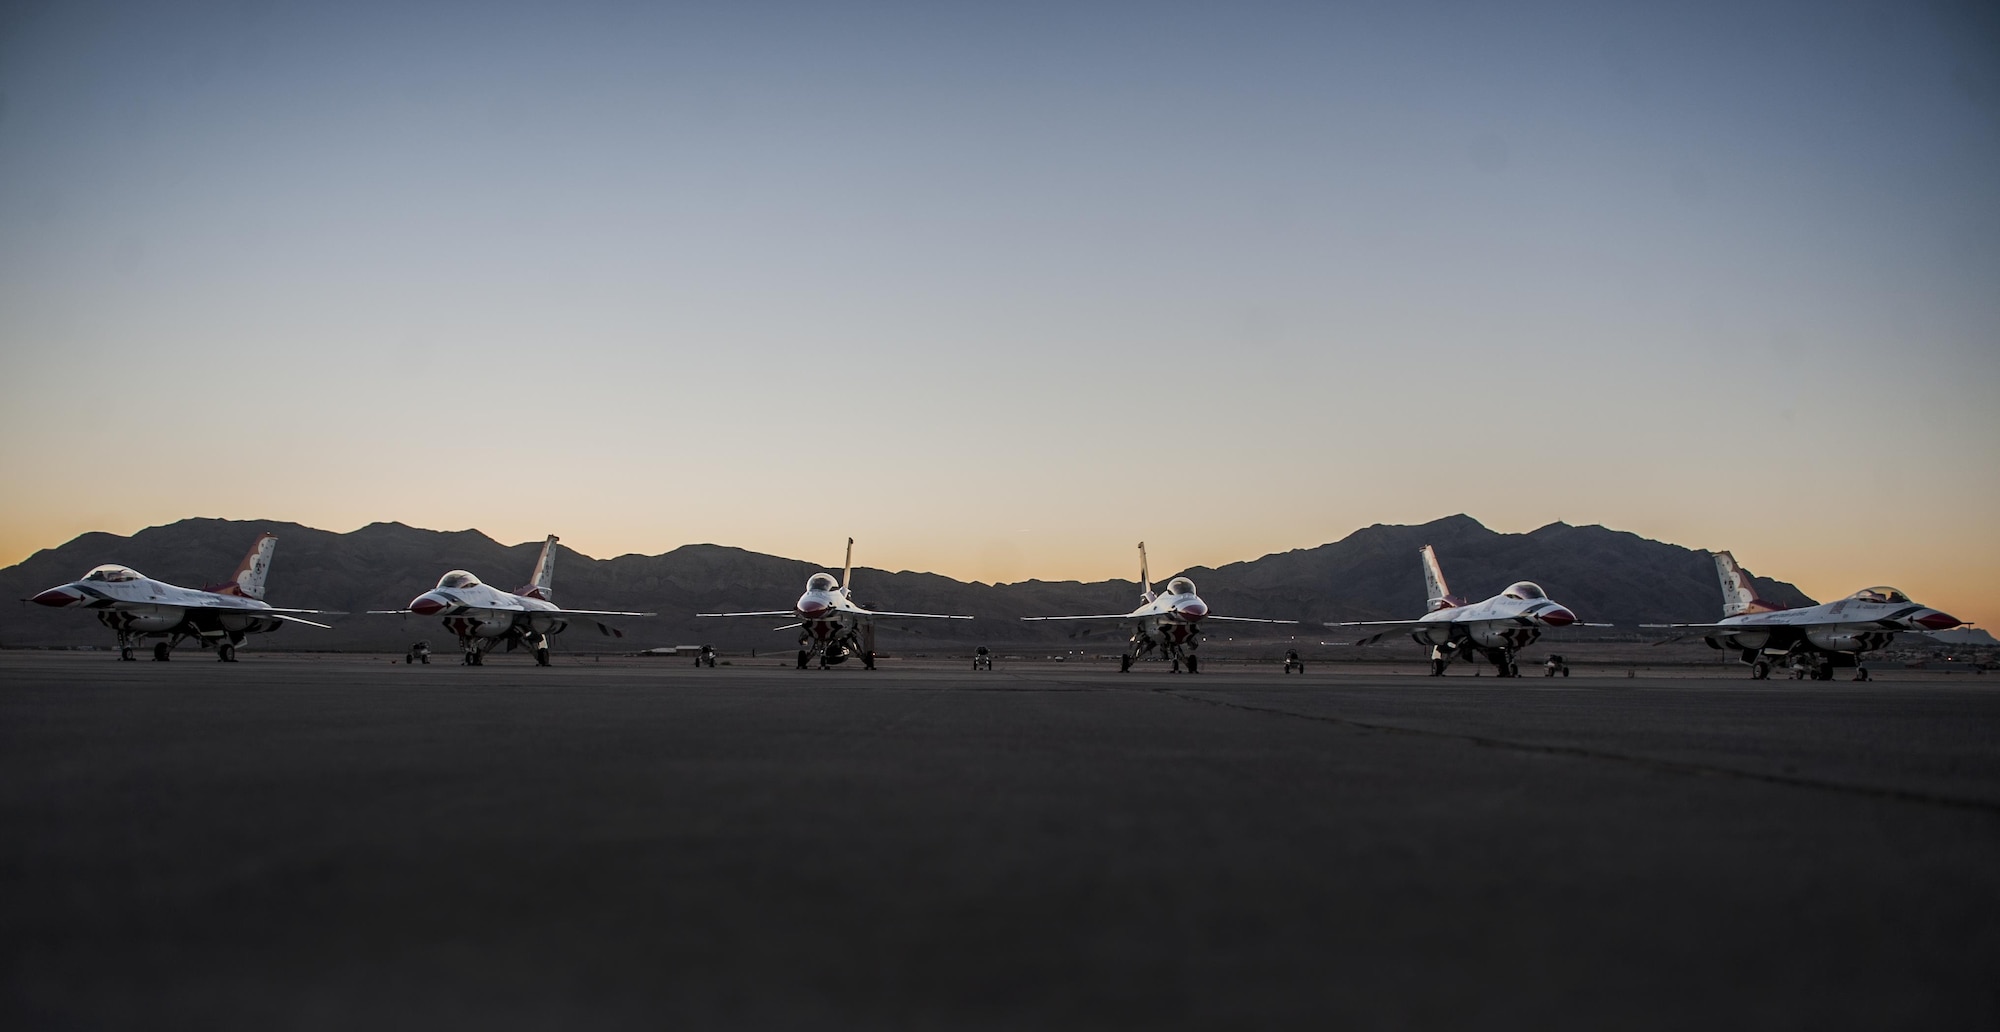 The U.S. Air Force Thunderbirds Air Demonstration Squadron’s F-16s sit on the flightline at Nellis Air Force Base, Nev., before Aviation Nation, Nov. 11, 2016. The Air Force Thunderbirds demonstrate the capabilities of the Air Force and the decisive combat power Airmen bring to threats against the U.S. (U.S. Air Force photo by Airman 1st Class Kevin Tanenbaum/Released)